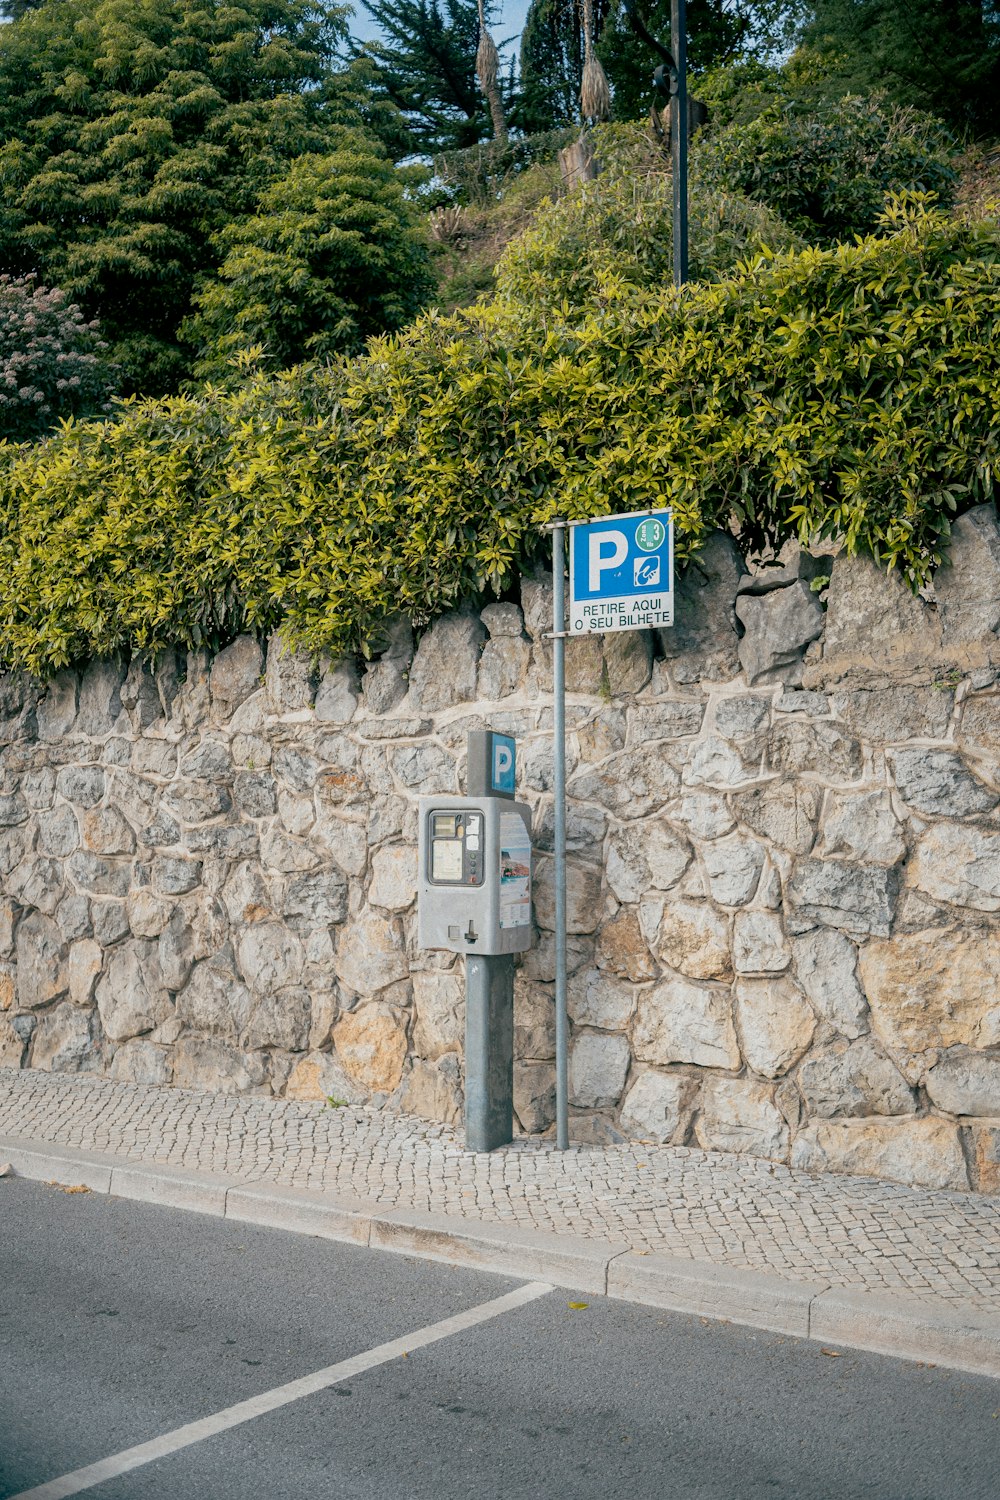 a parking meter next to a stone wall